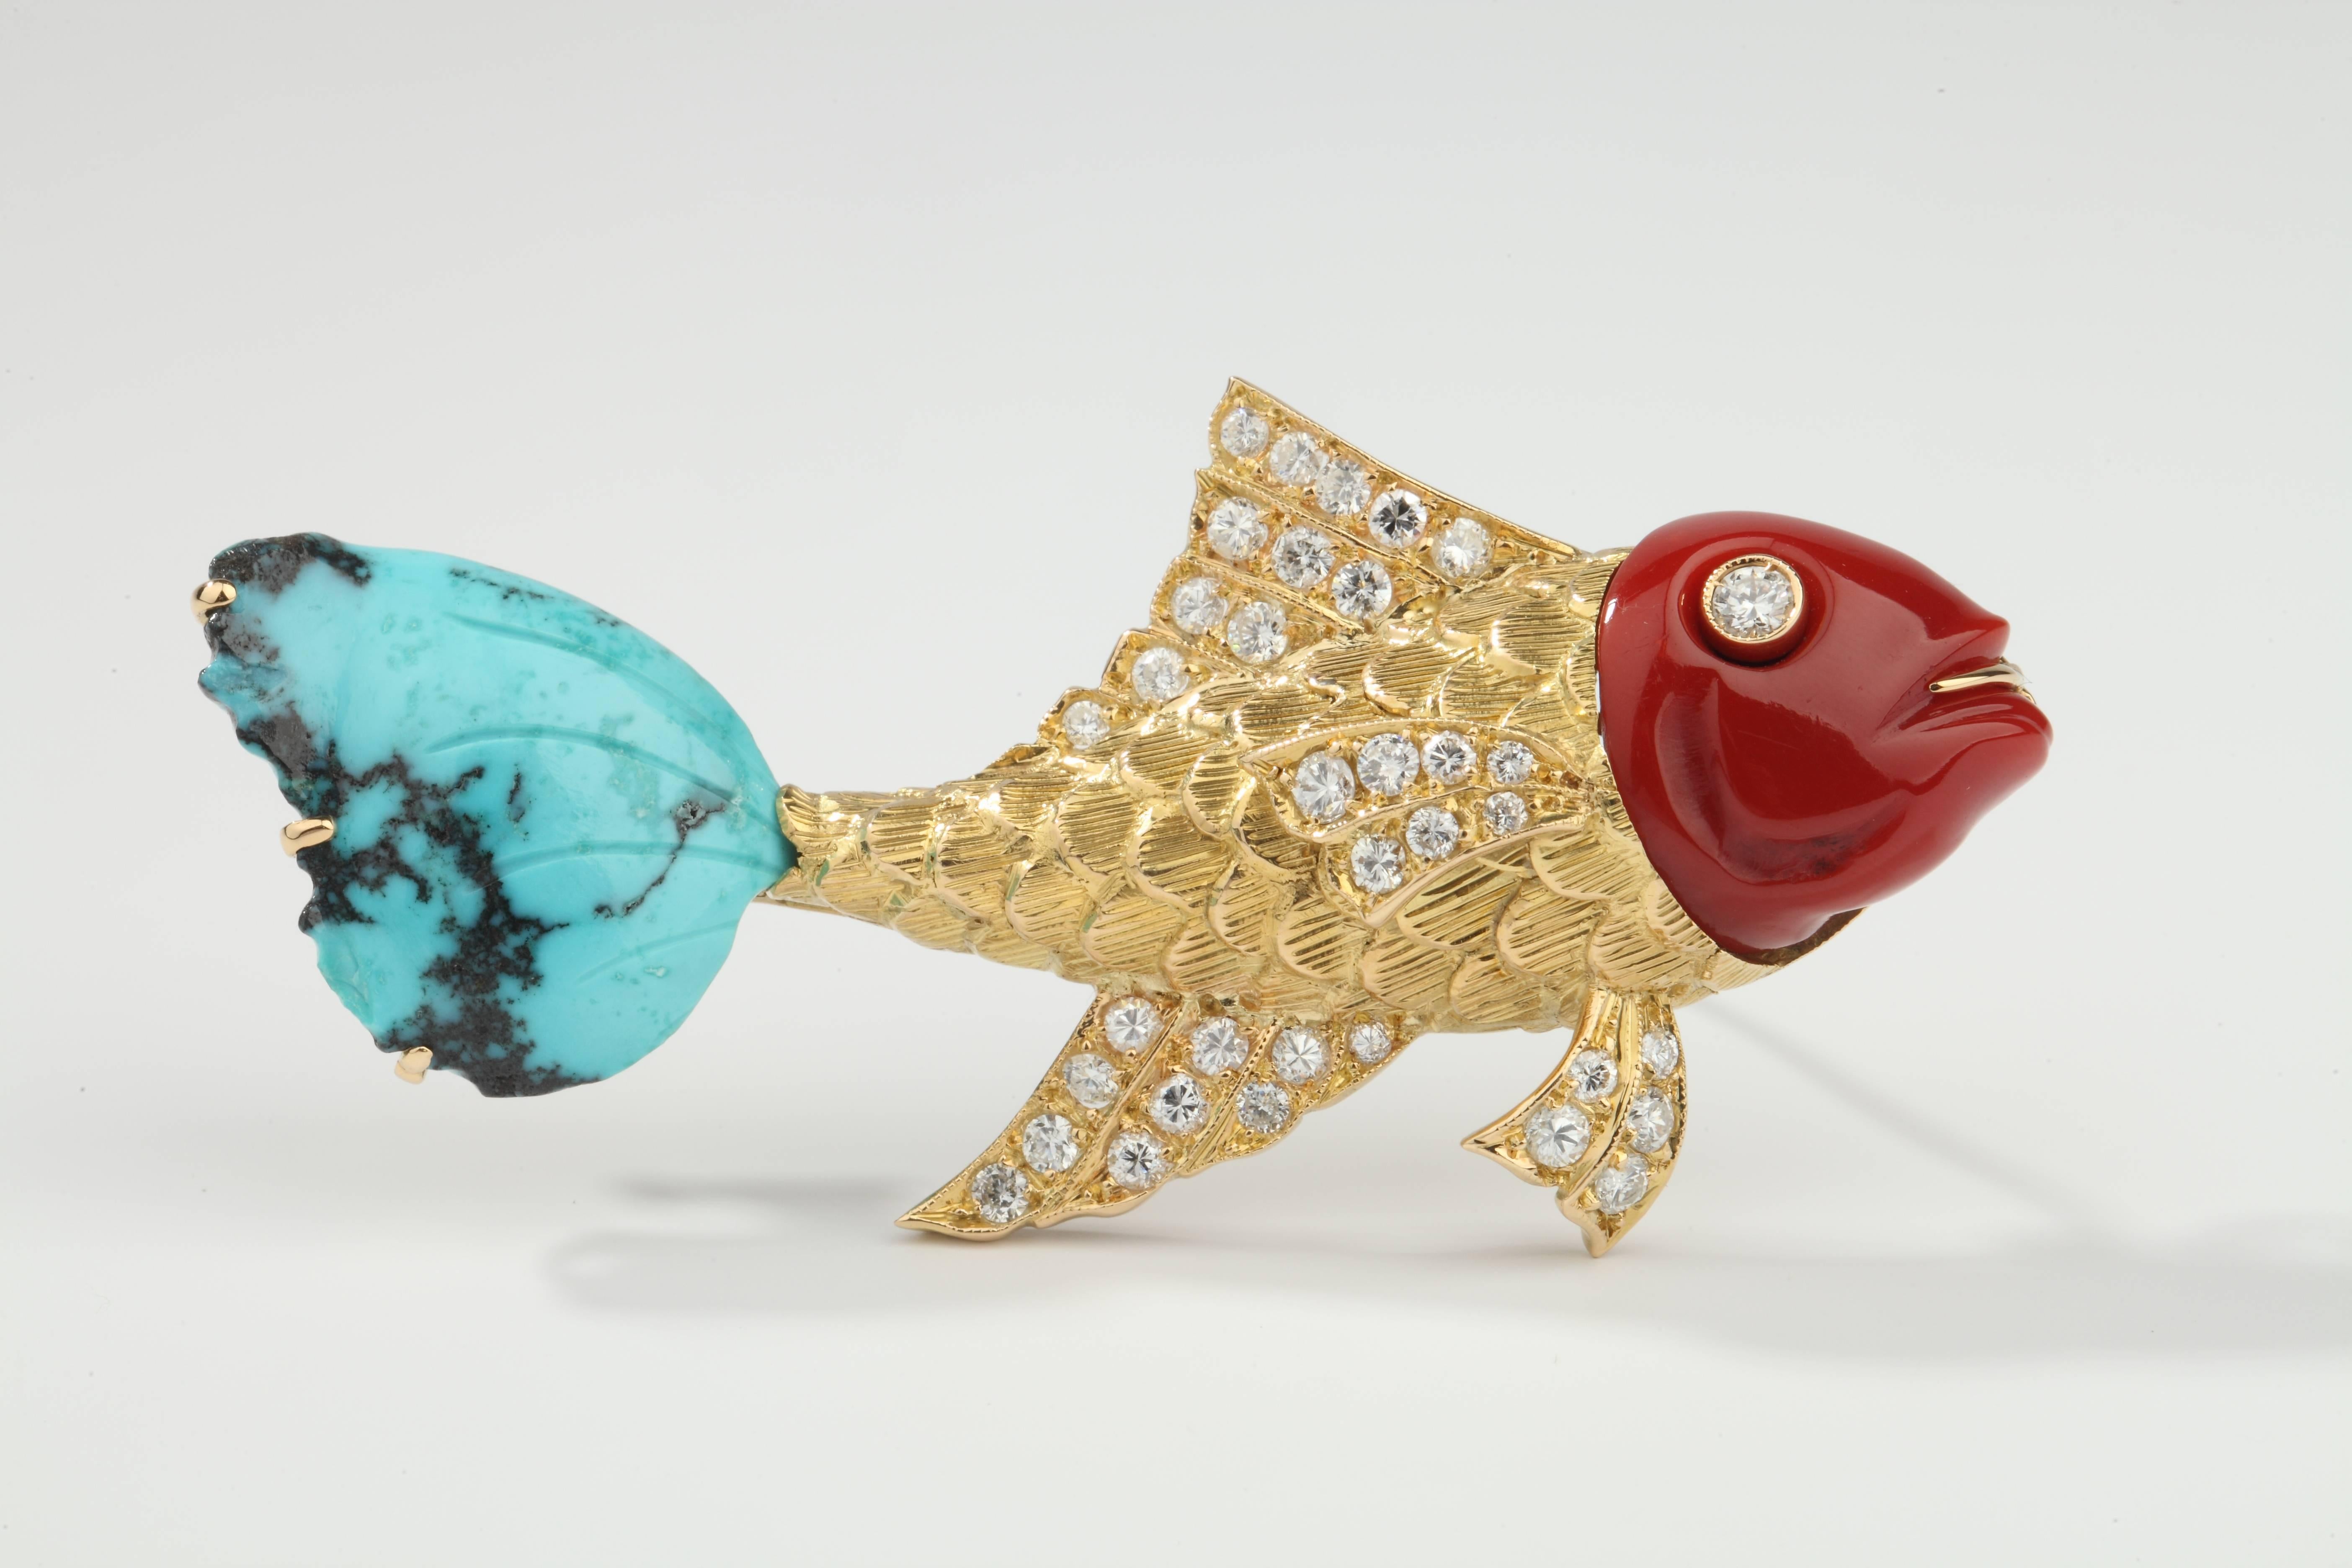 Very nice brooch in yellow gold stylizing a fish, the head in red coral (corallium spp), the body in yellow gold set with brillant-cut diamonds and the tail in turquoise.
Can be worn as a pendant.
Signed G.NARDI